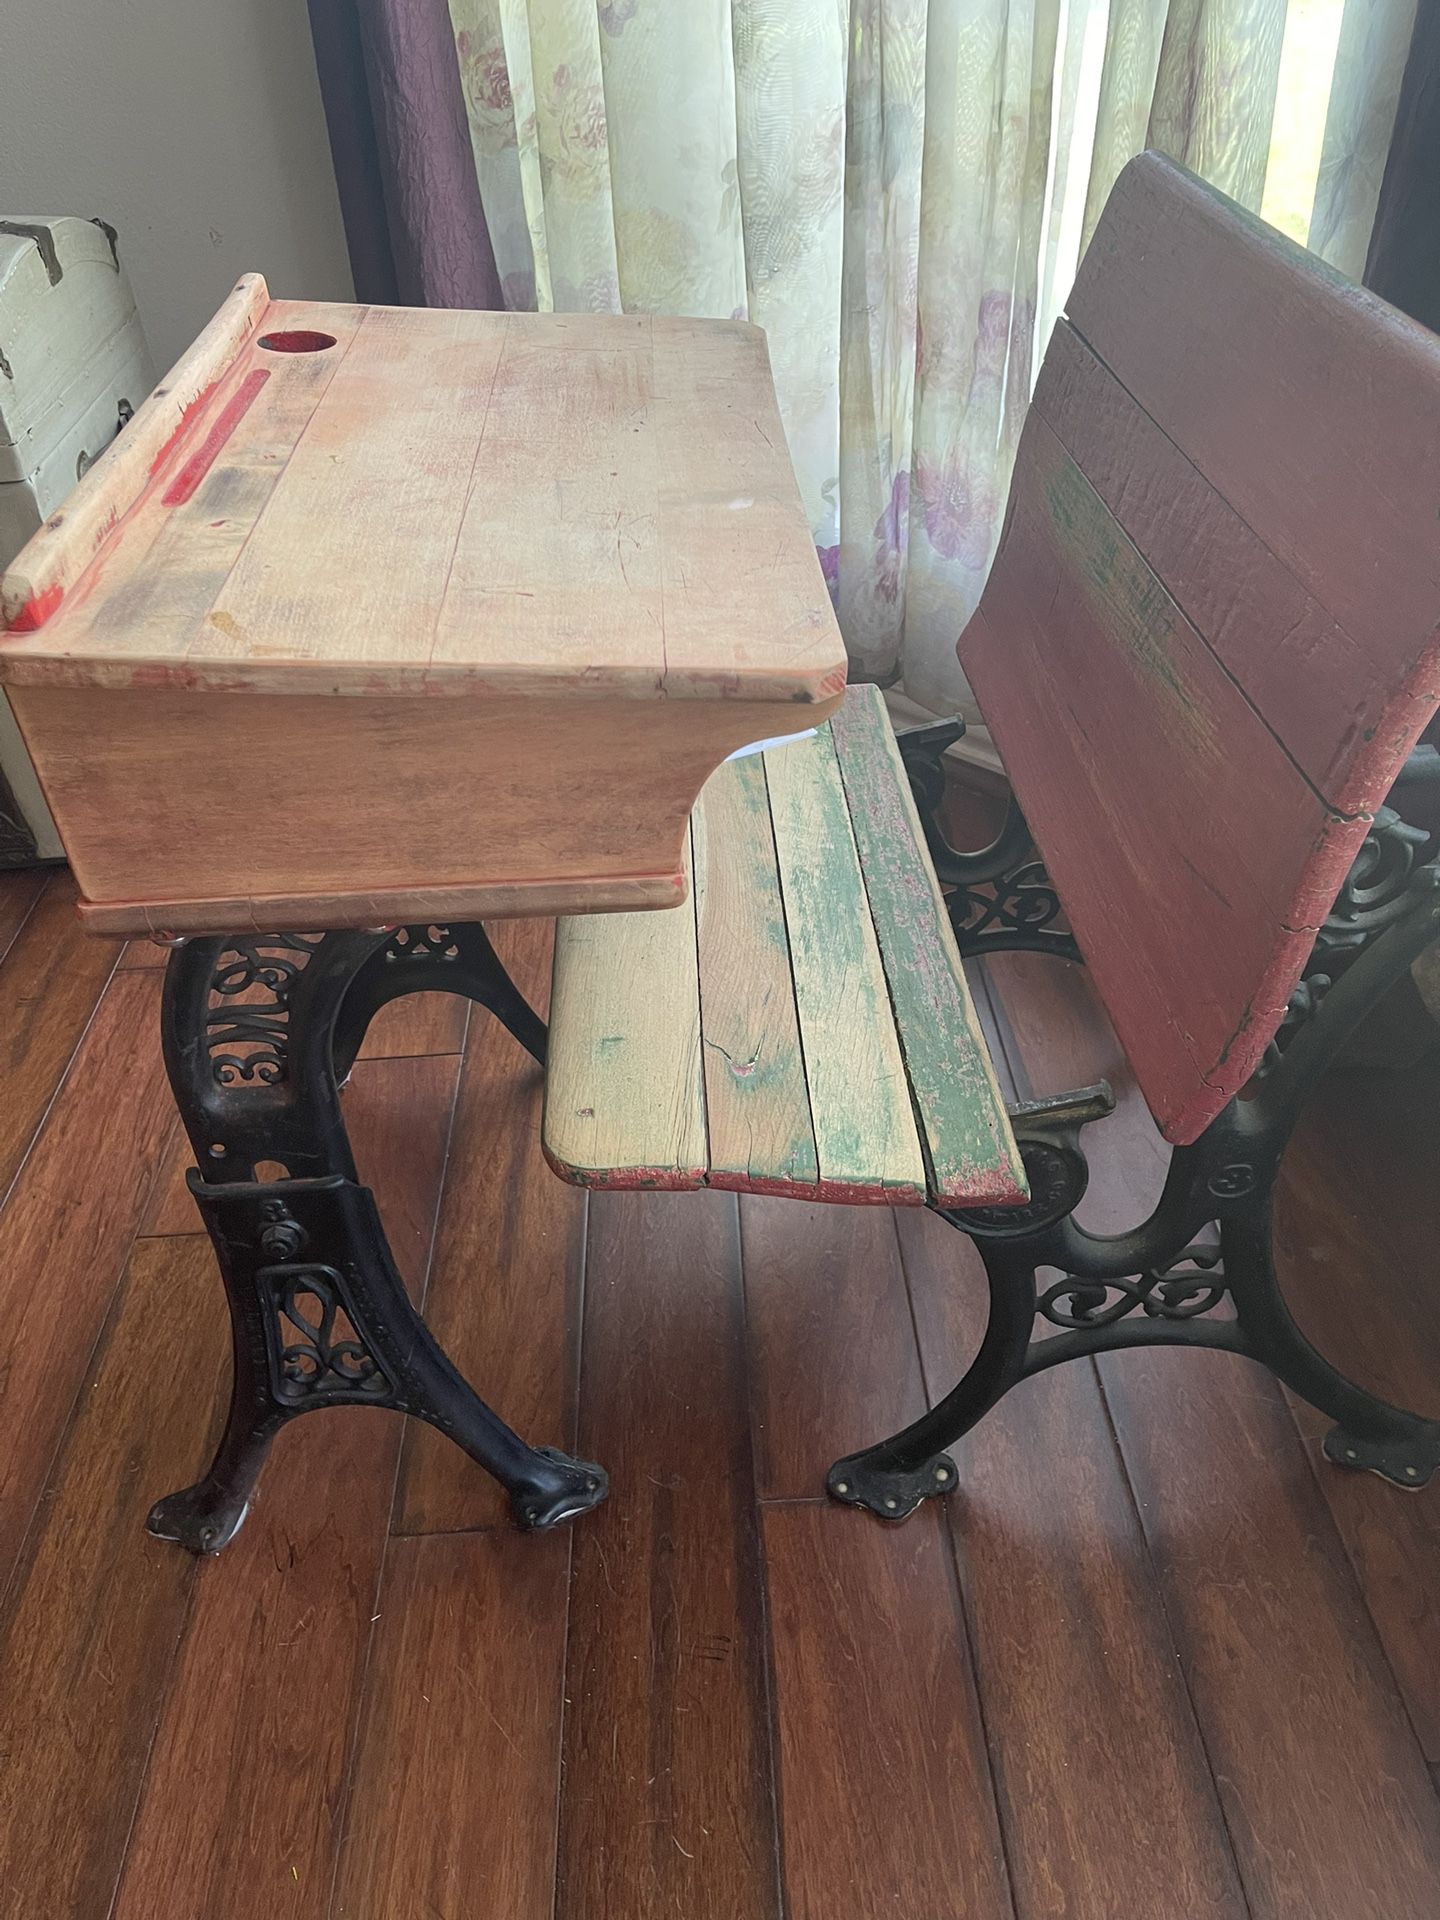 Antique Child’s Classroom Desk And Chair